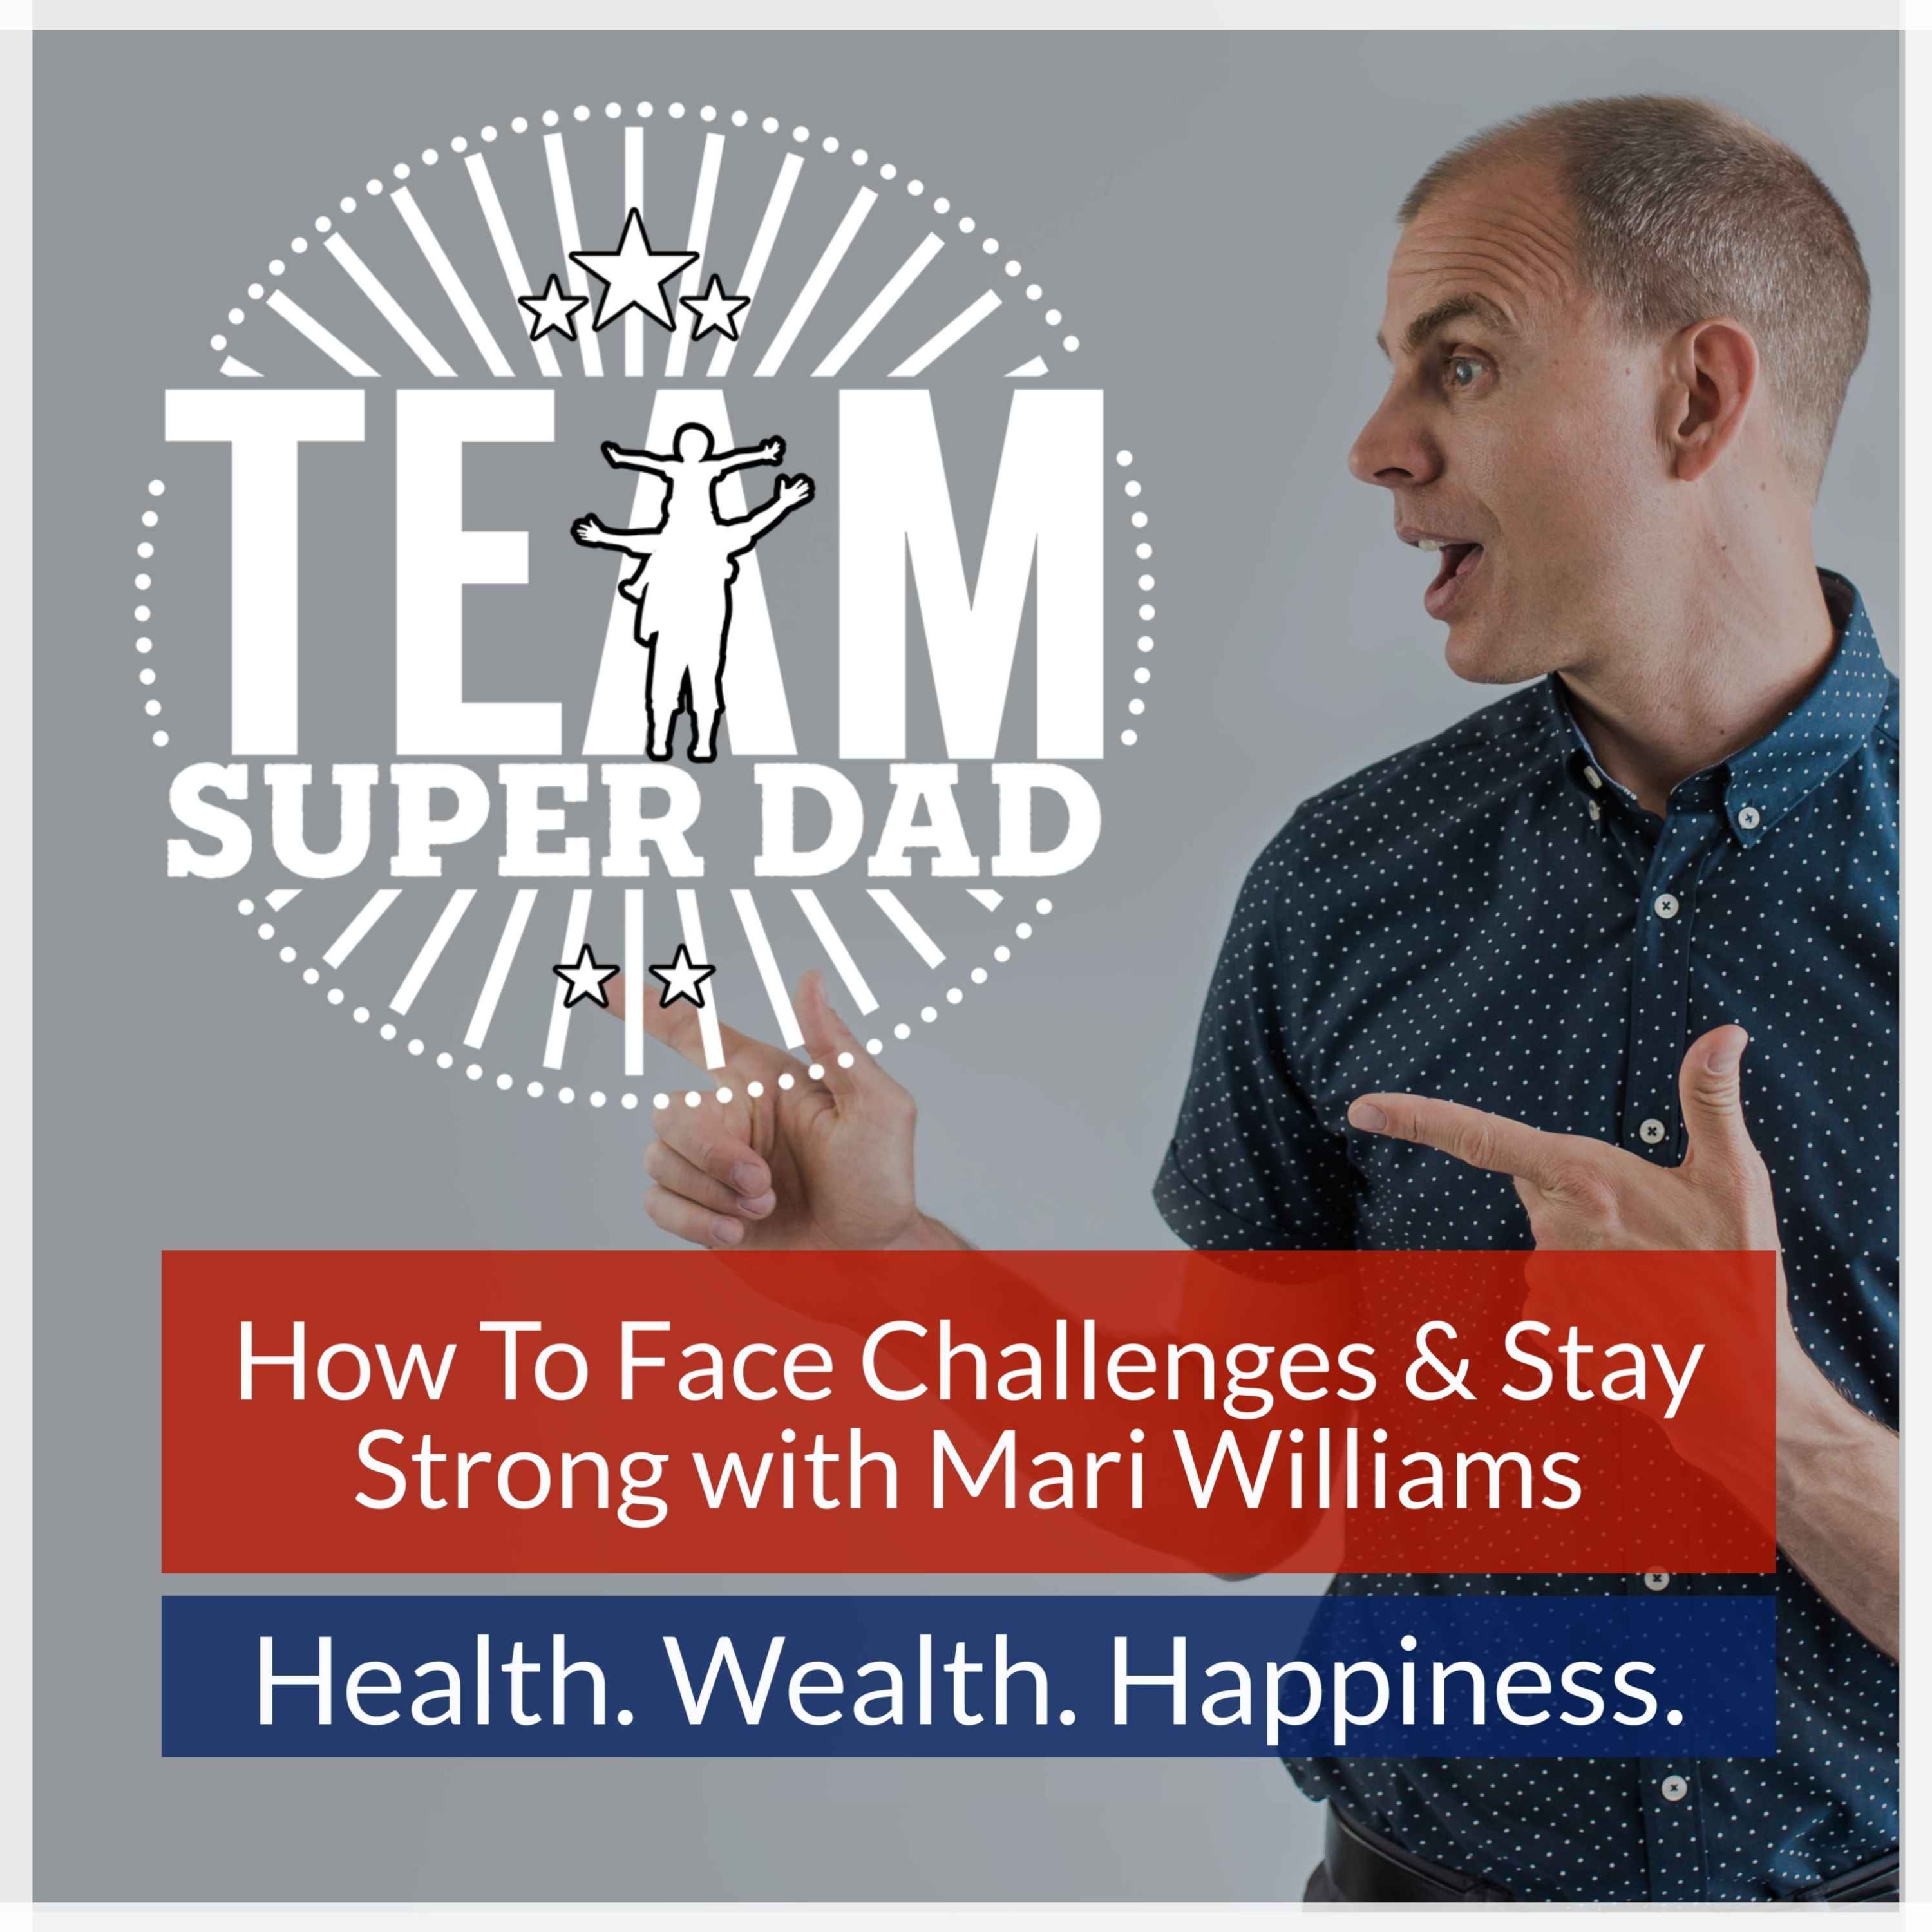 How To Be A Strong Leader with Mari Williams